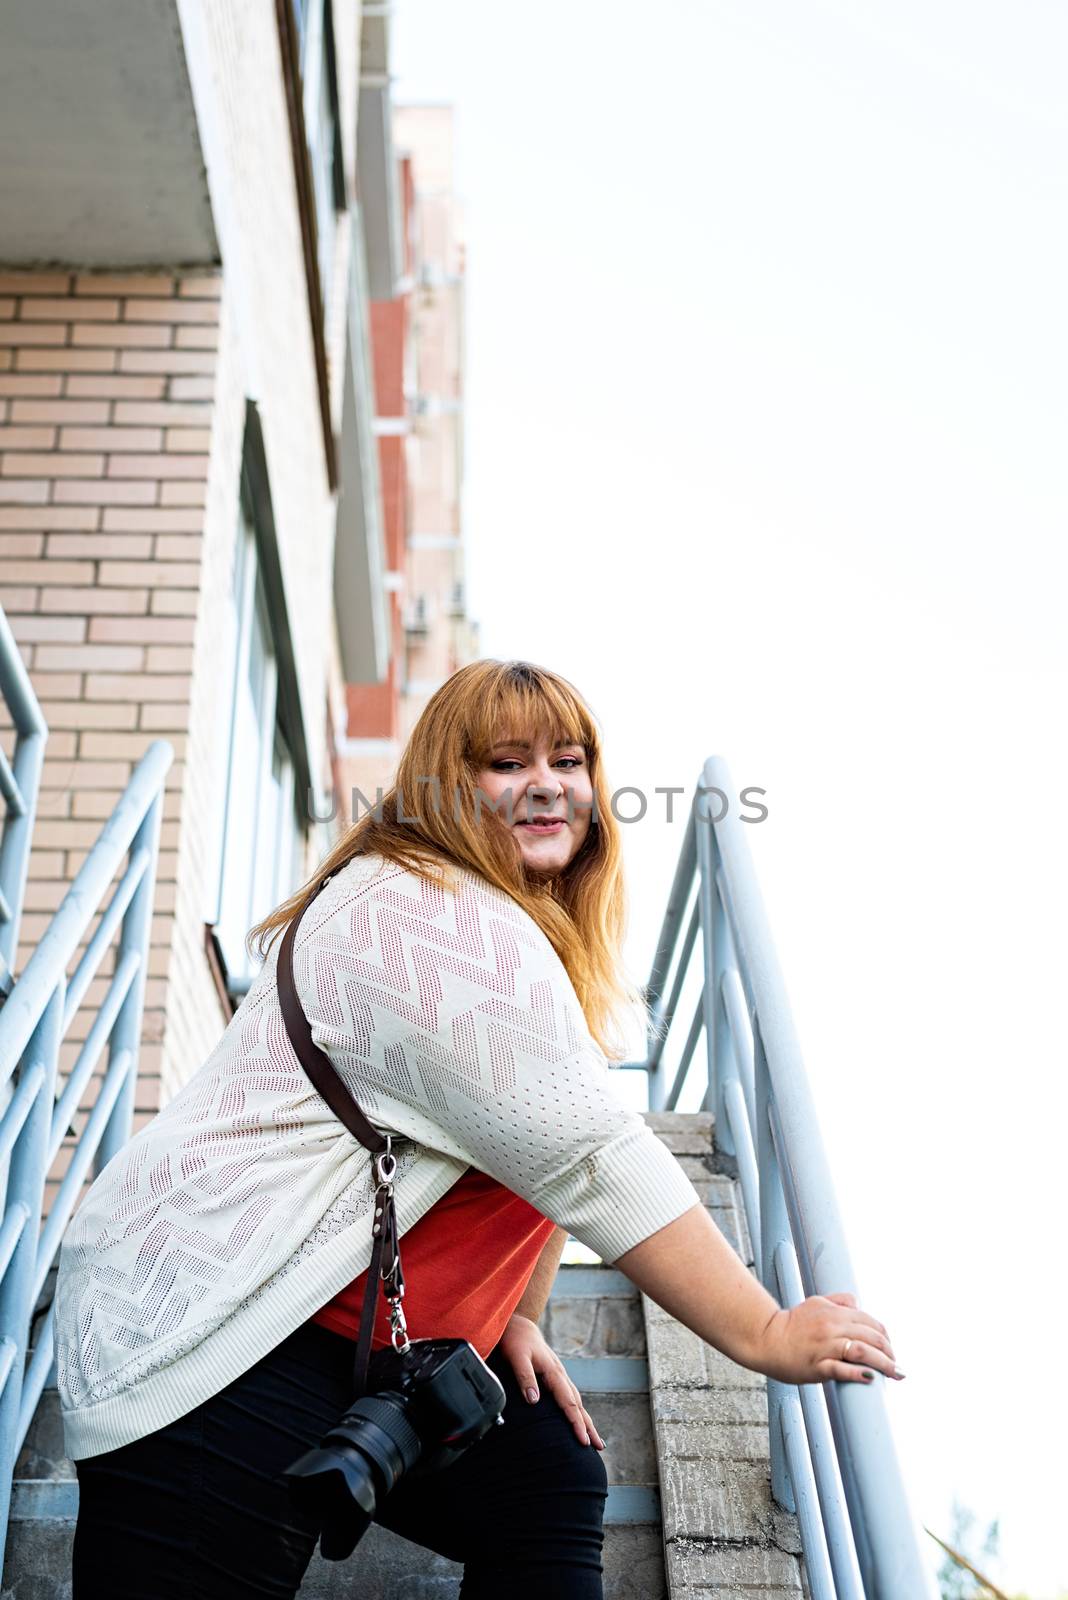 Travel, tourism and entertainment. Plus size woman photographer working at the street